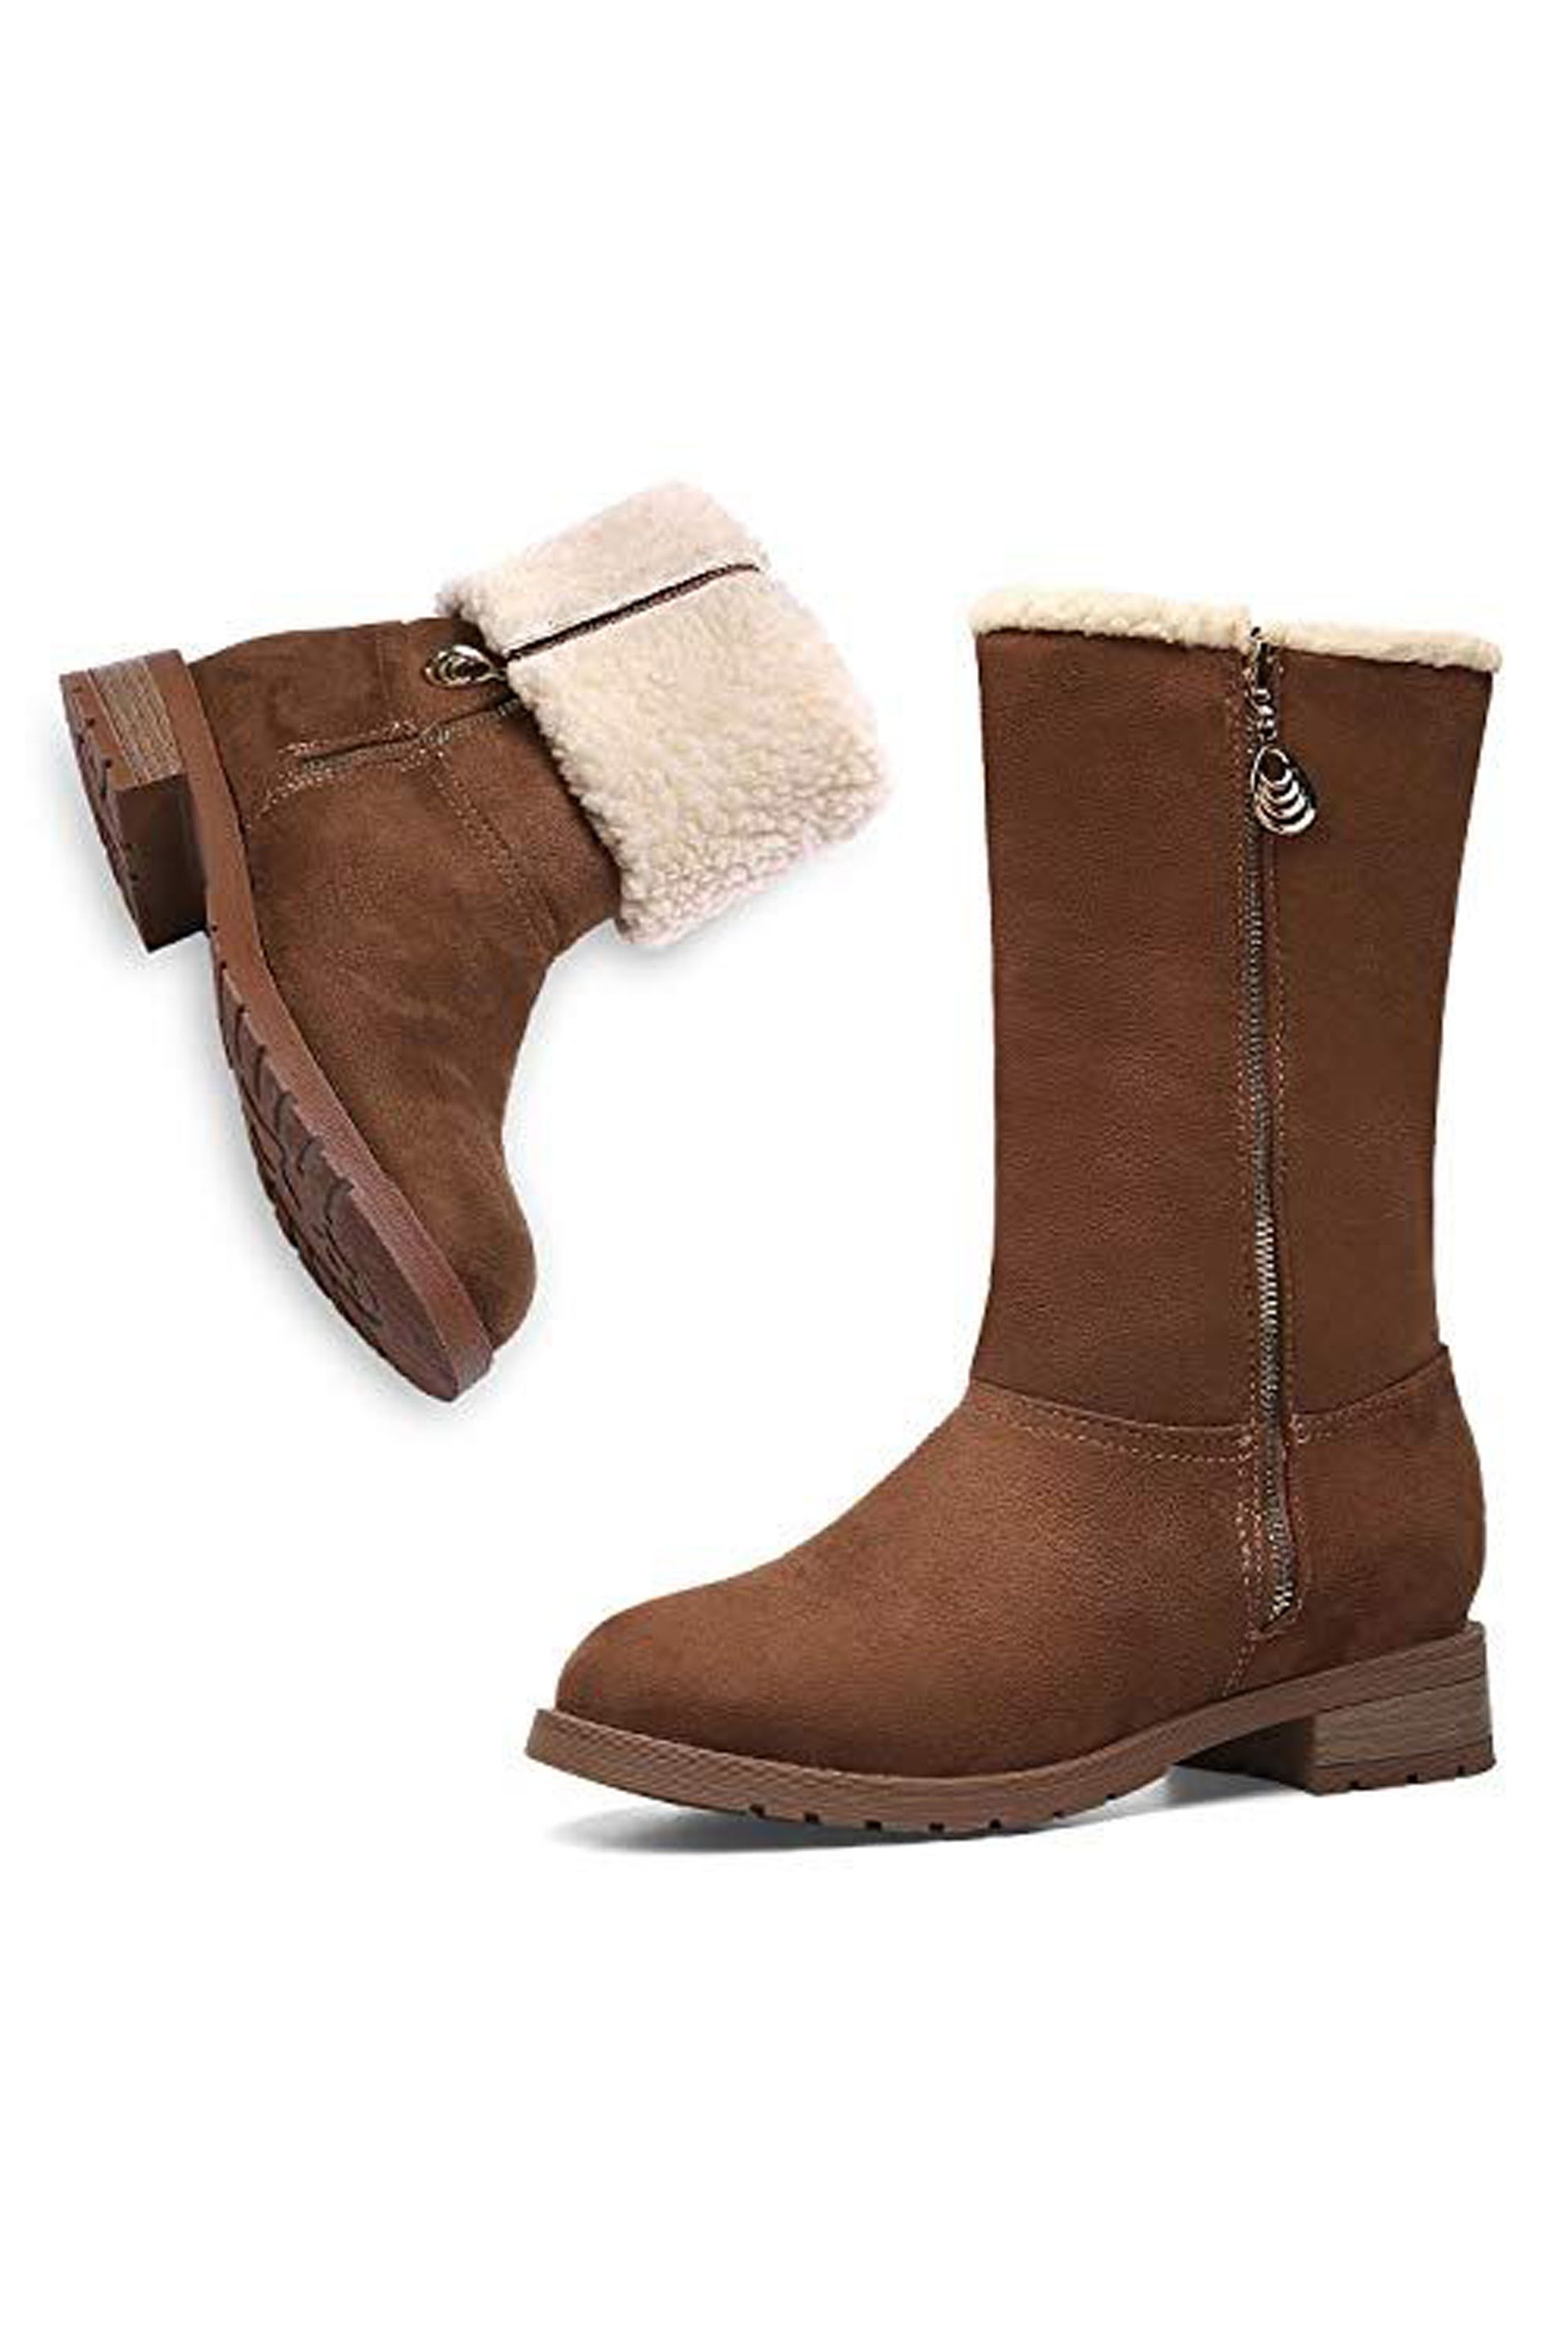 winter boots for teenage girl